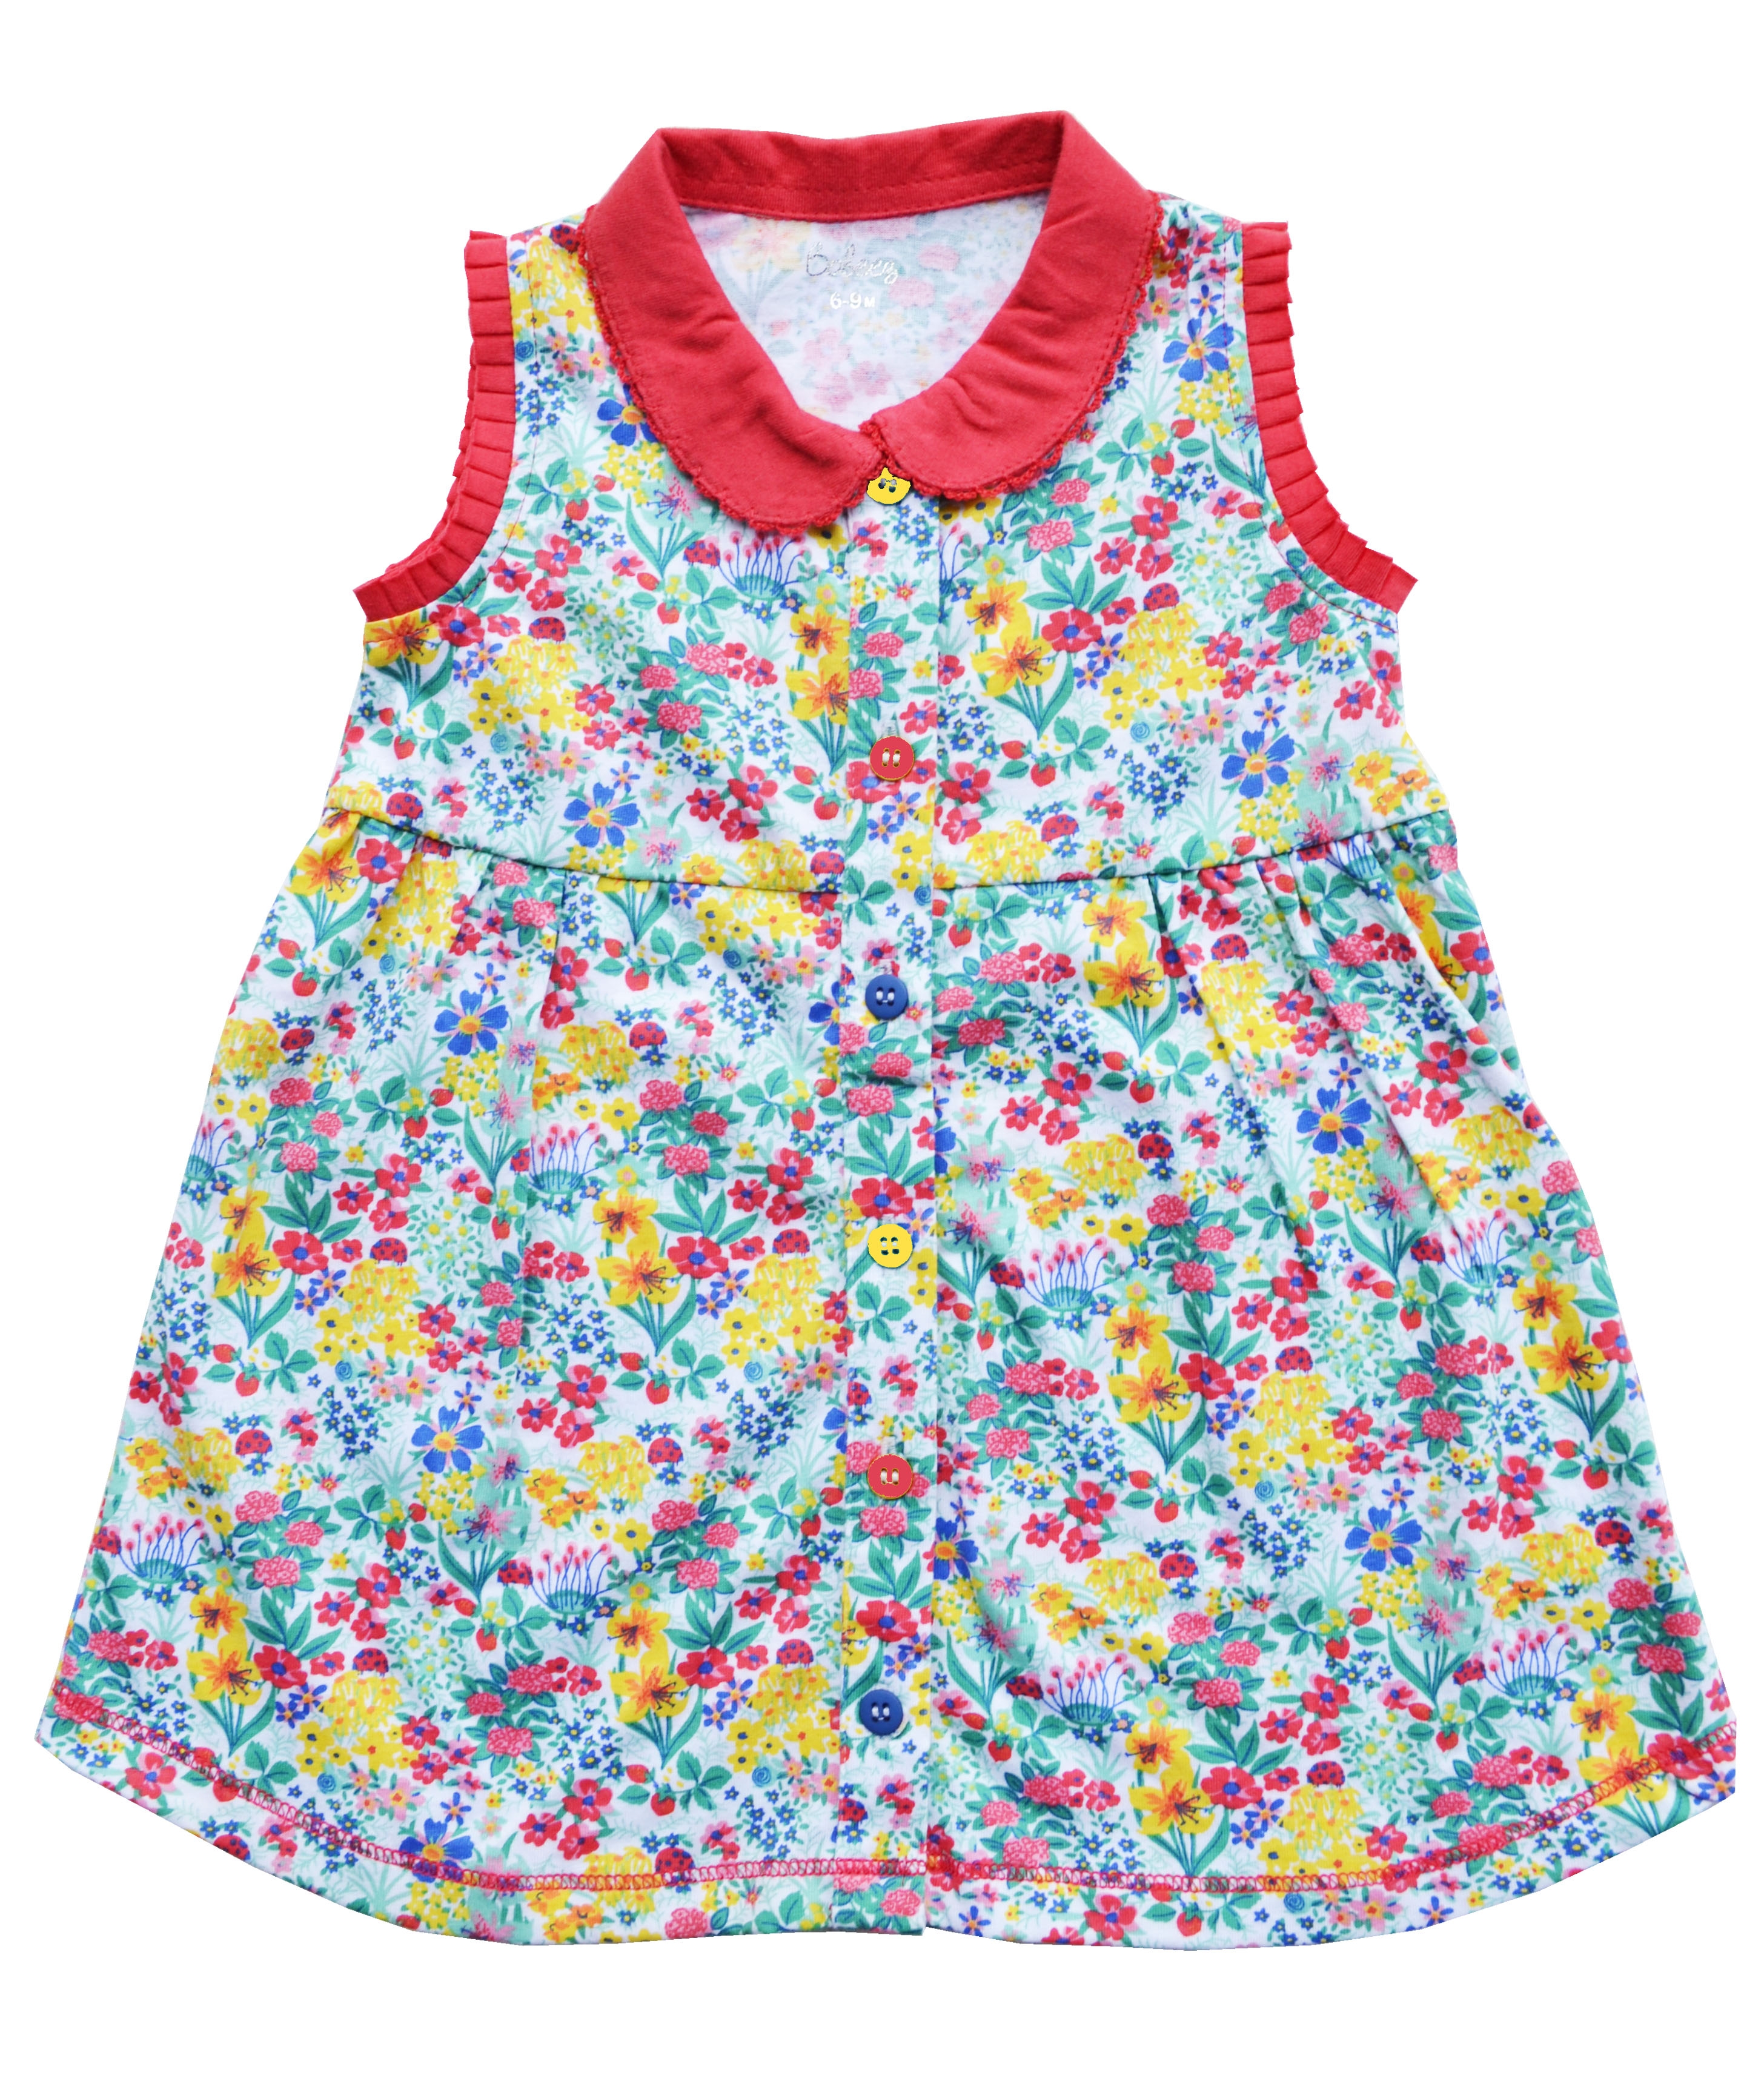 Babeez | Allover Multicolored Flower Print Sleeveless Dress (100% Cotton Jersey) undefined